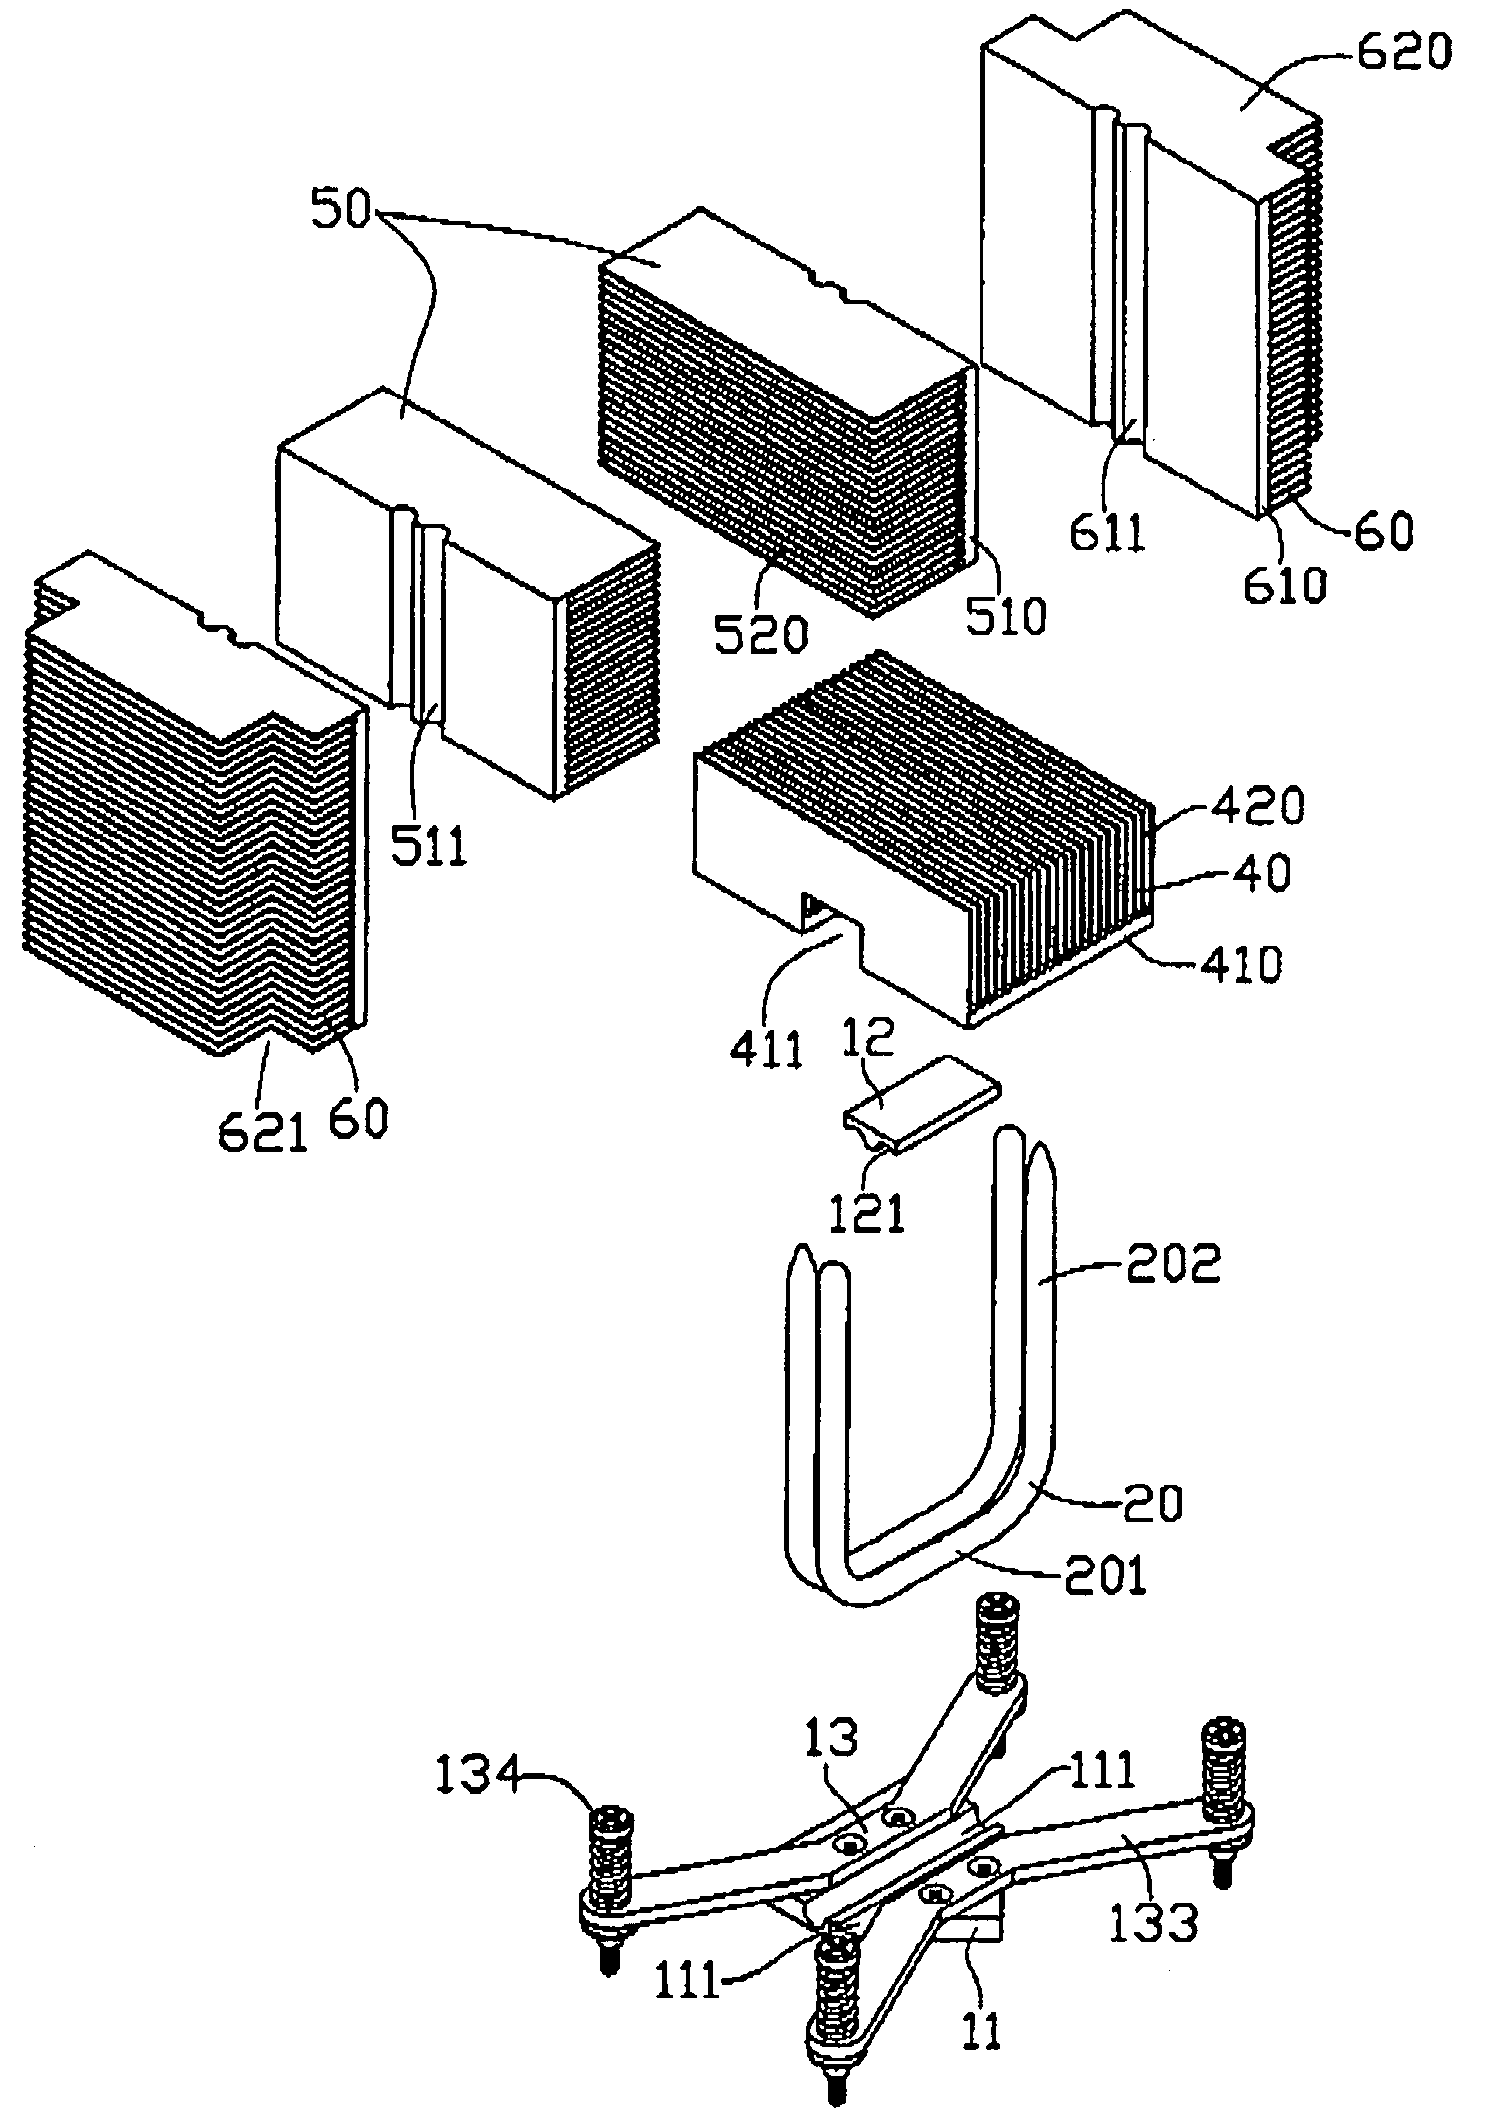 Heat dissipation device with heat pipes